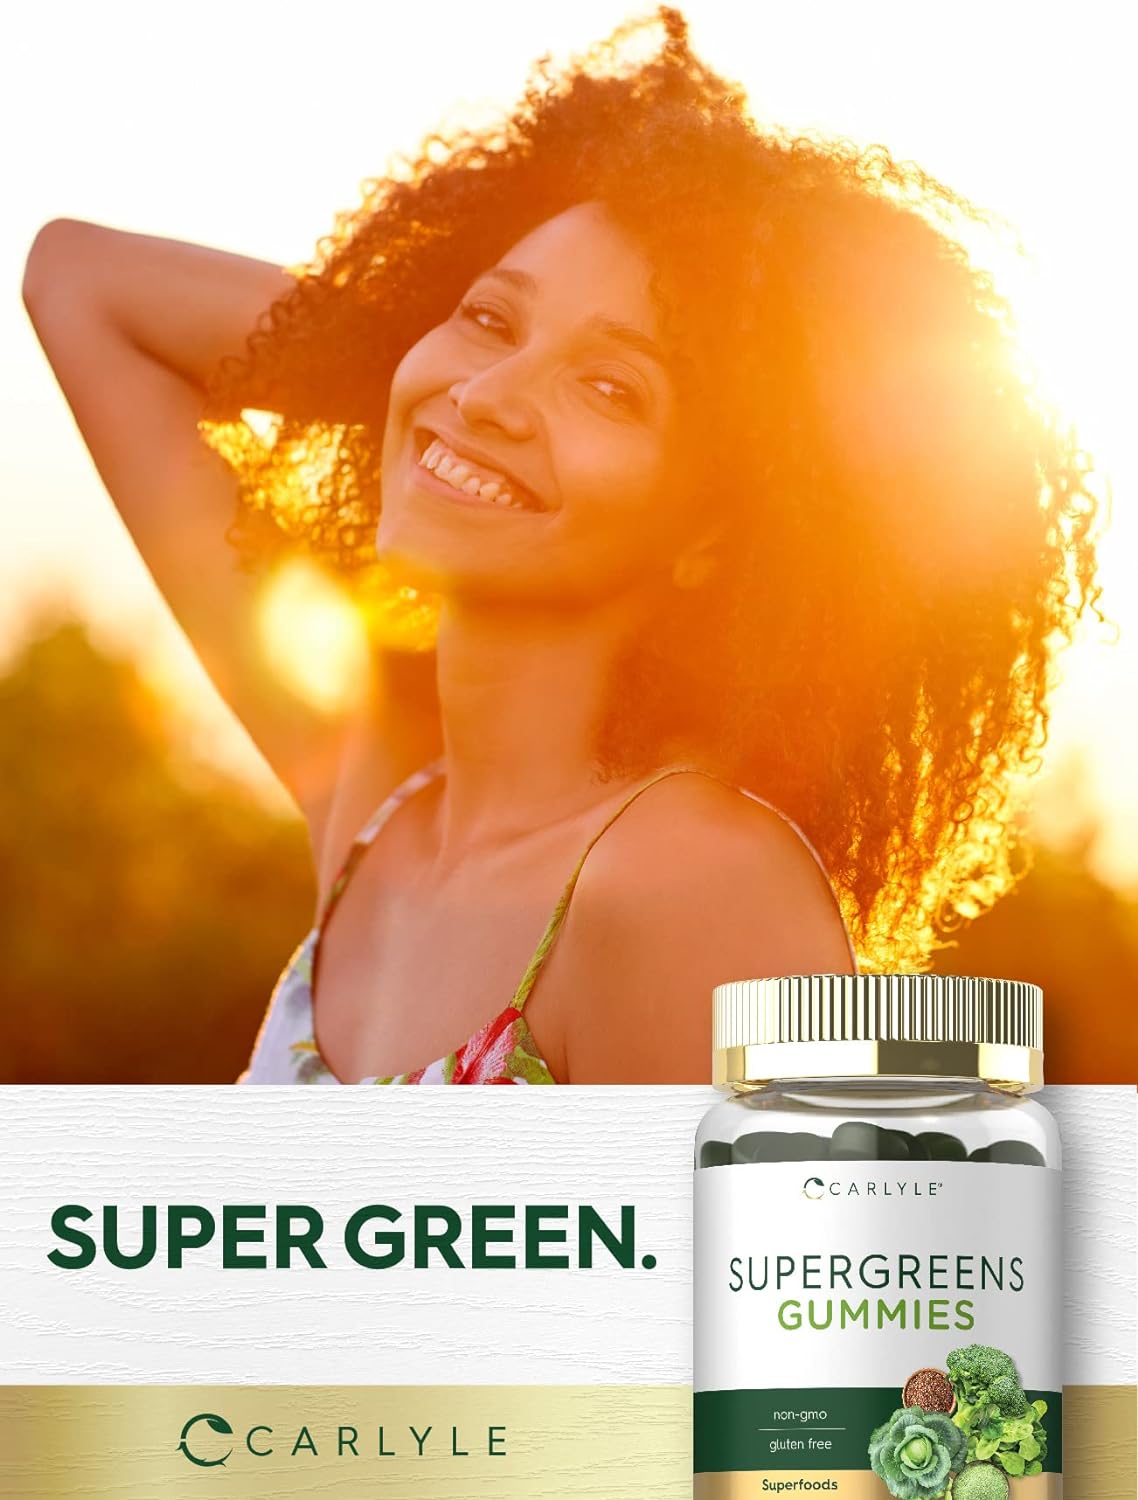 Super Greens Gummies | Vegan, Non-GMO and Gluten Free Supplement | by Carlyle